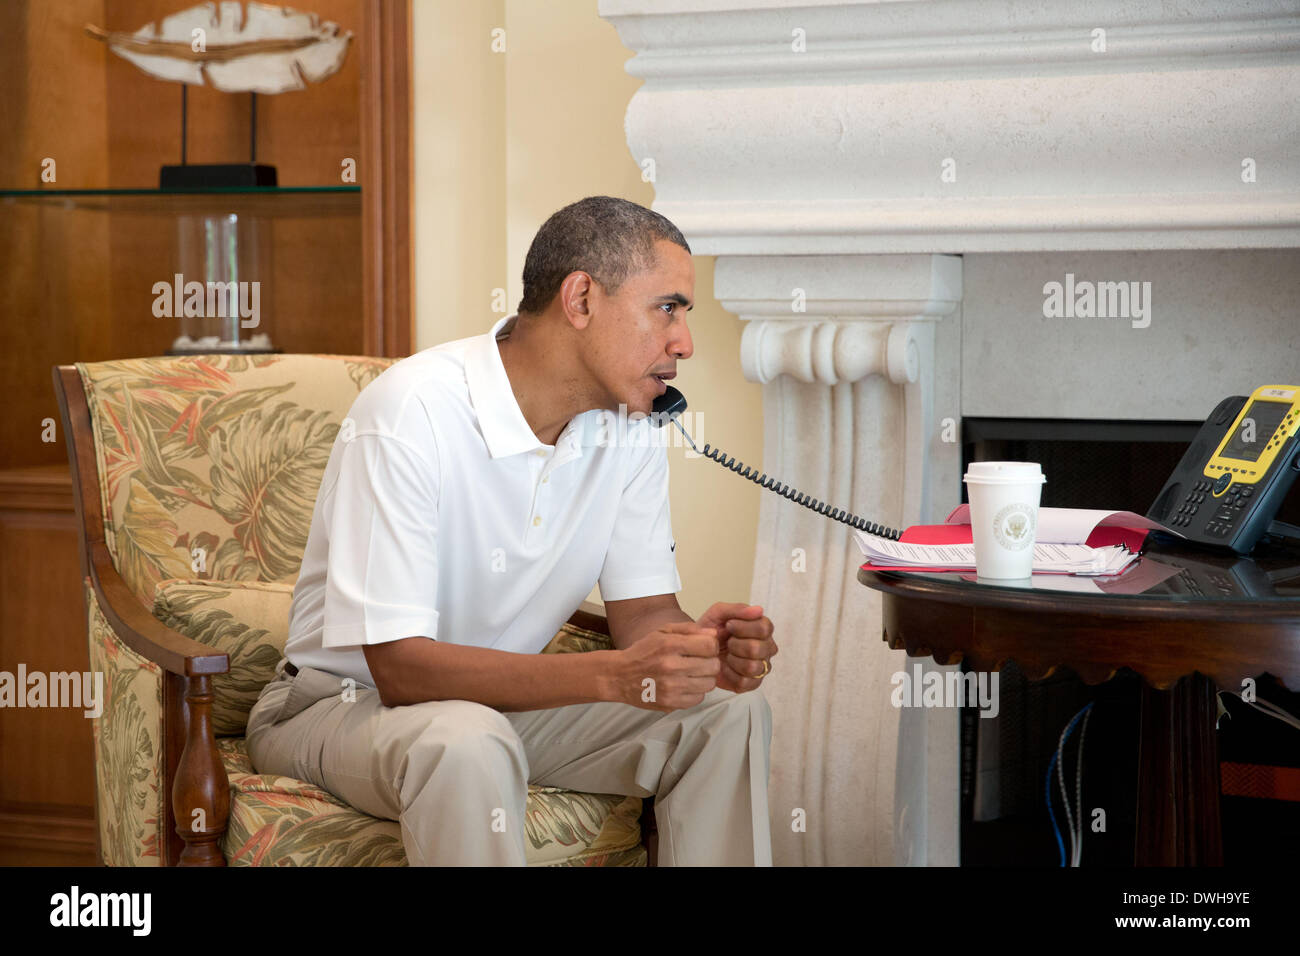 US President Barack Obama talks on the telephone with President Francois Hollande of France discussing the situation in Ukraine March 8, 2014 in Key Largo, Florida. Stock Photo